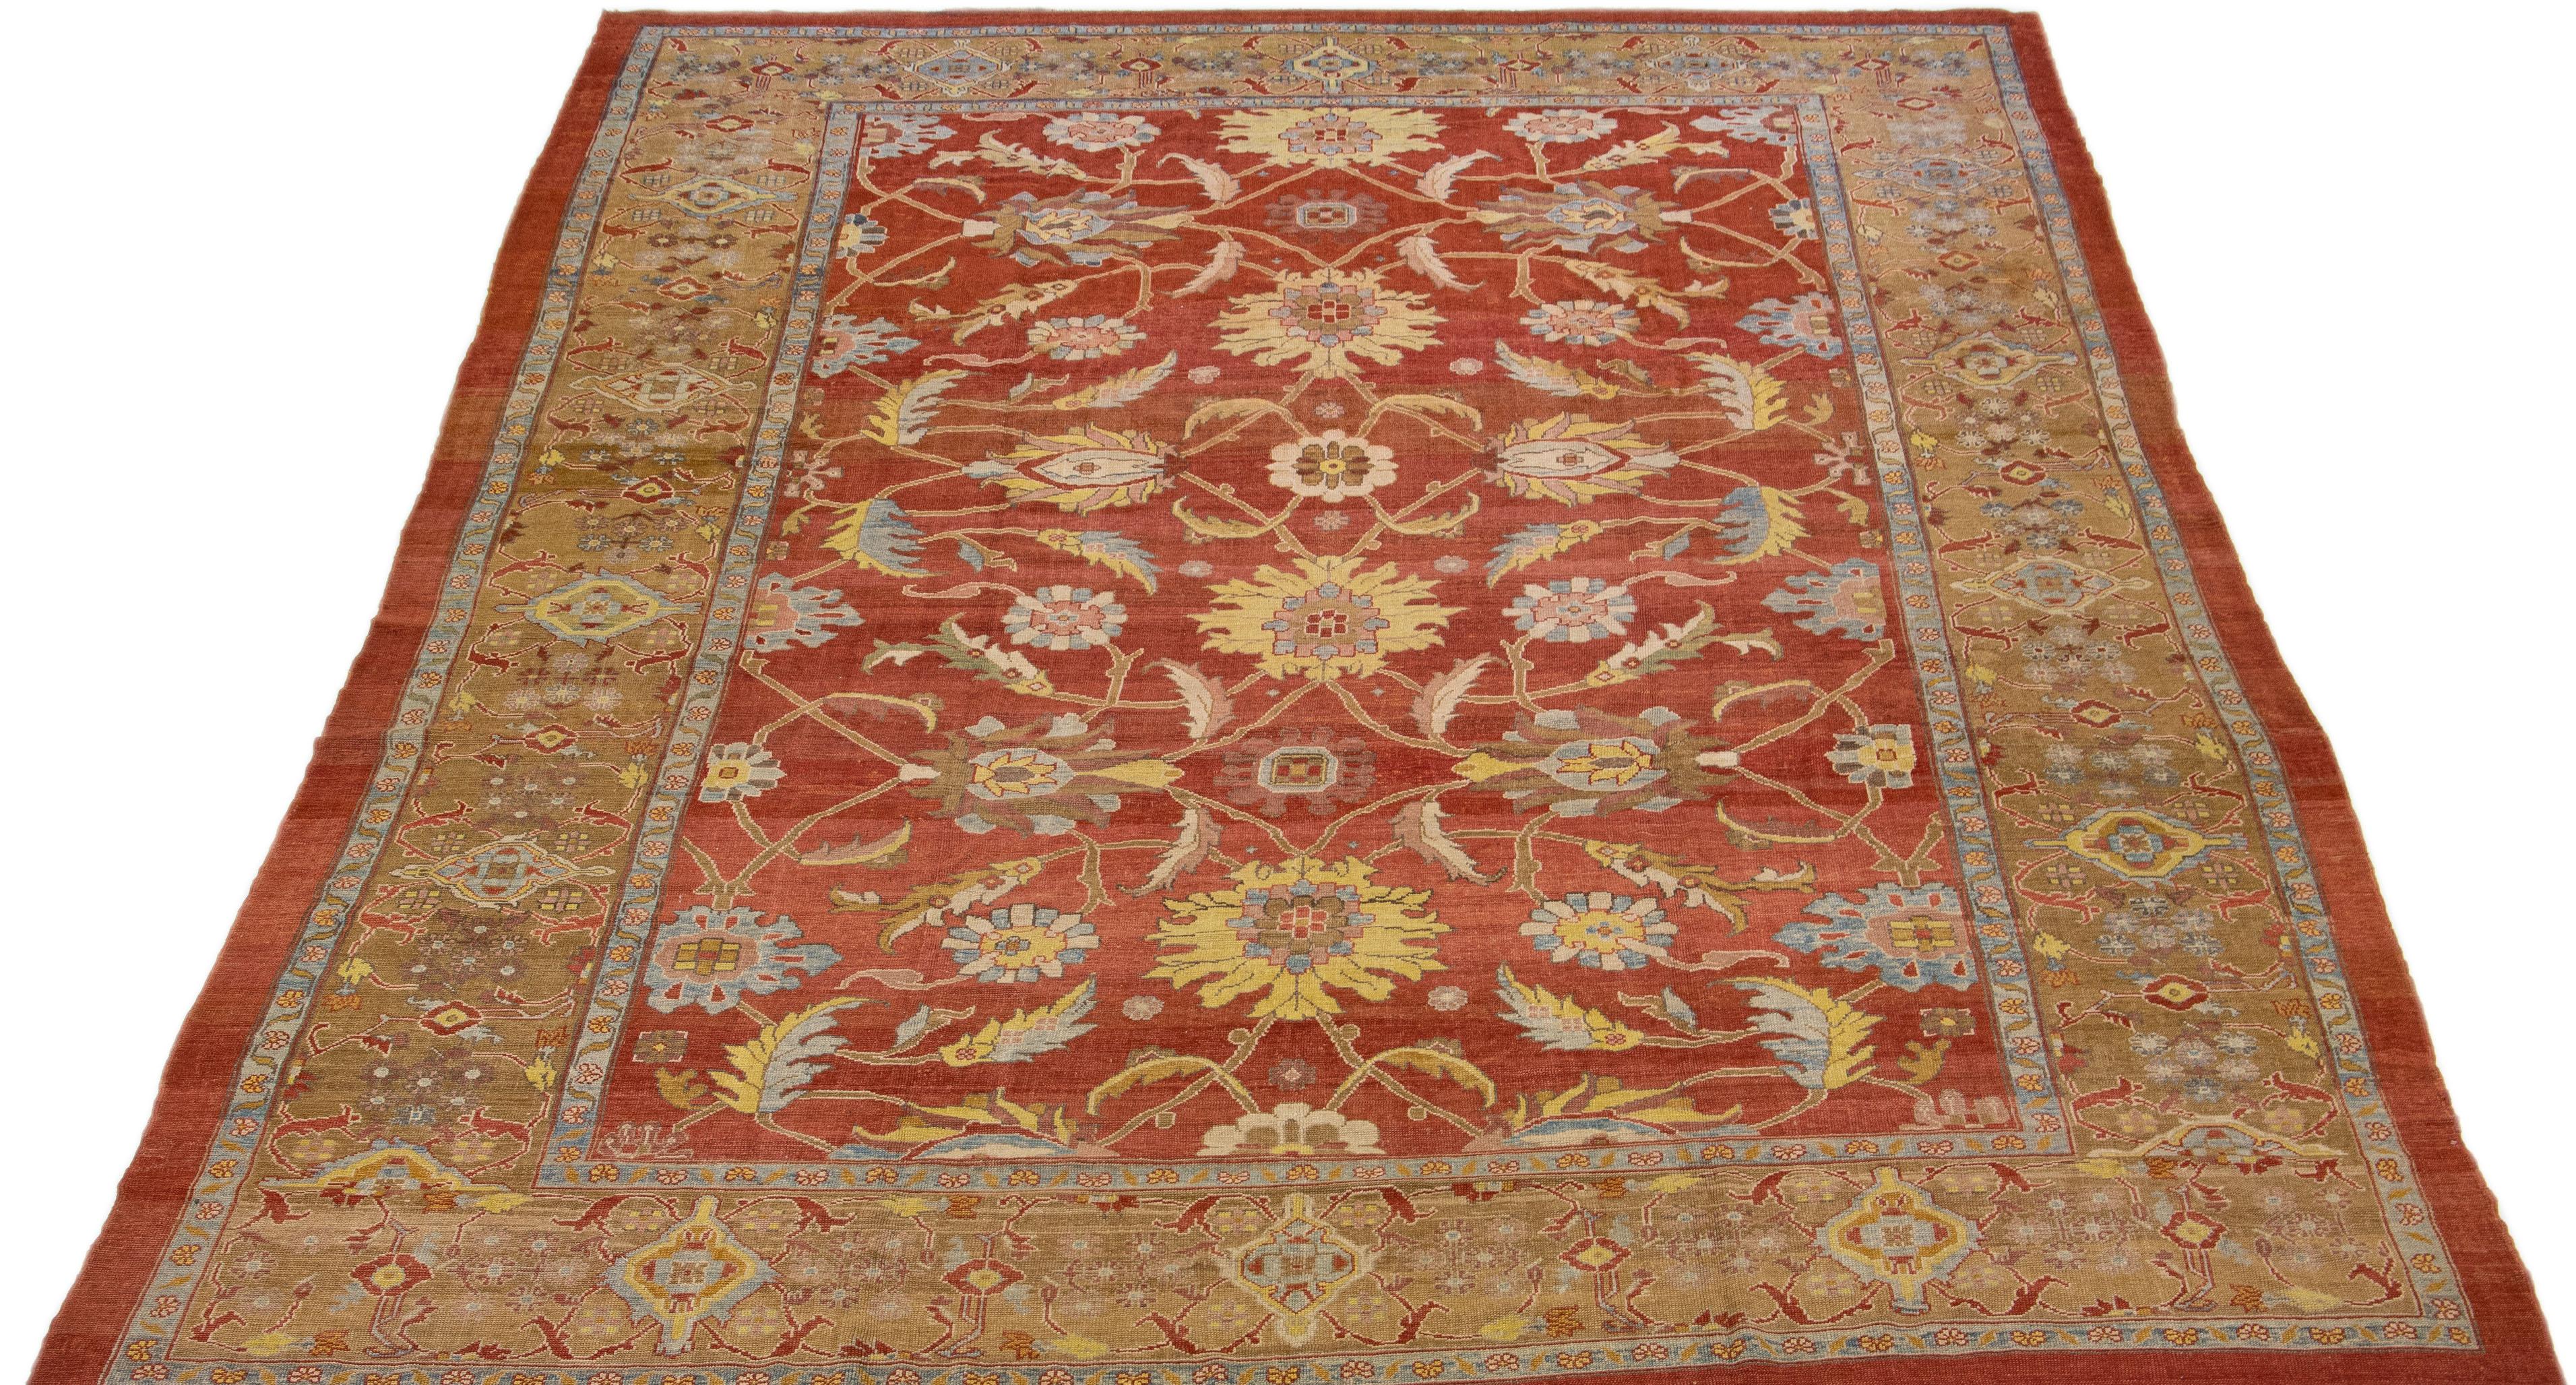 Beautiful modern Sultanabad hand-knotted wool rug with a red-rust color field. This rug has a brown designed frame with yellow, blue, and pink accents in a gorgeous all-over floral design.

This rug measures: 12'2